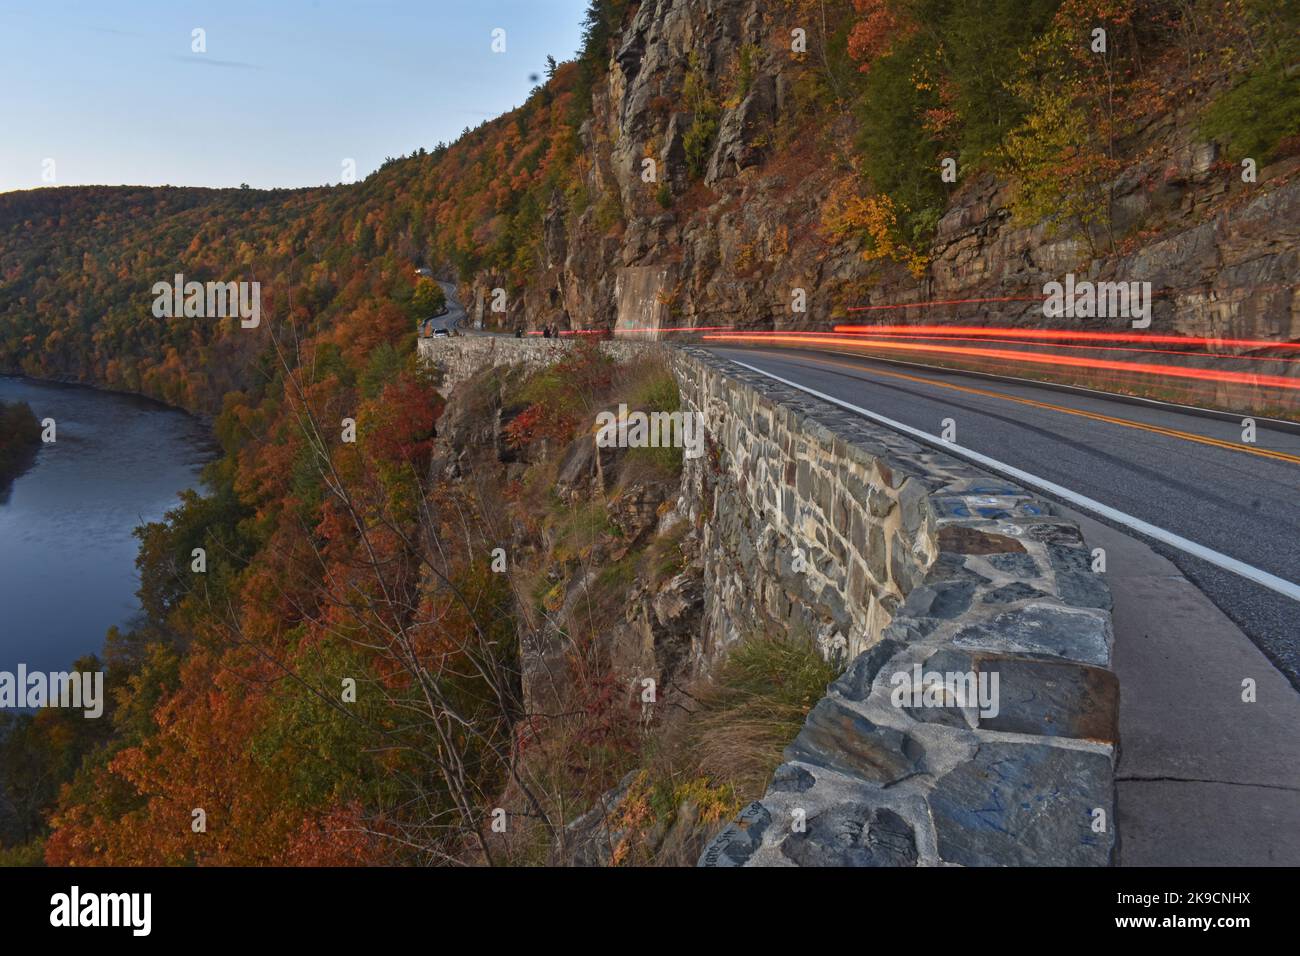 Light trails and colorful fall foliage in early evening at Hawk's Nest